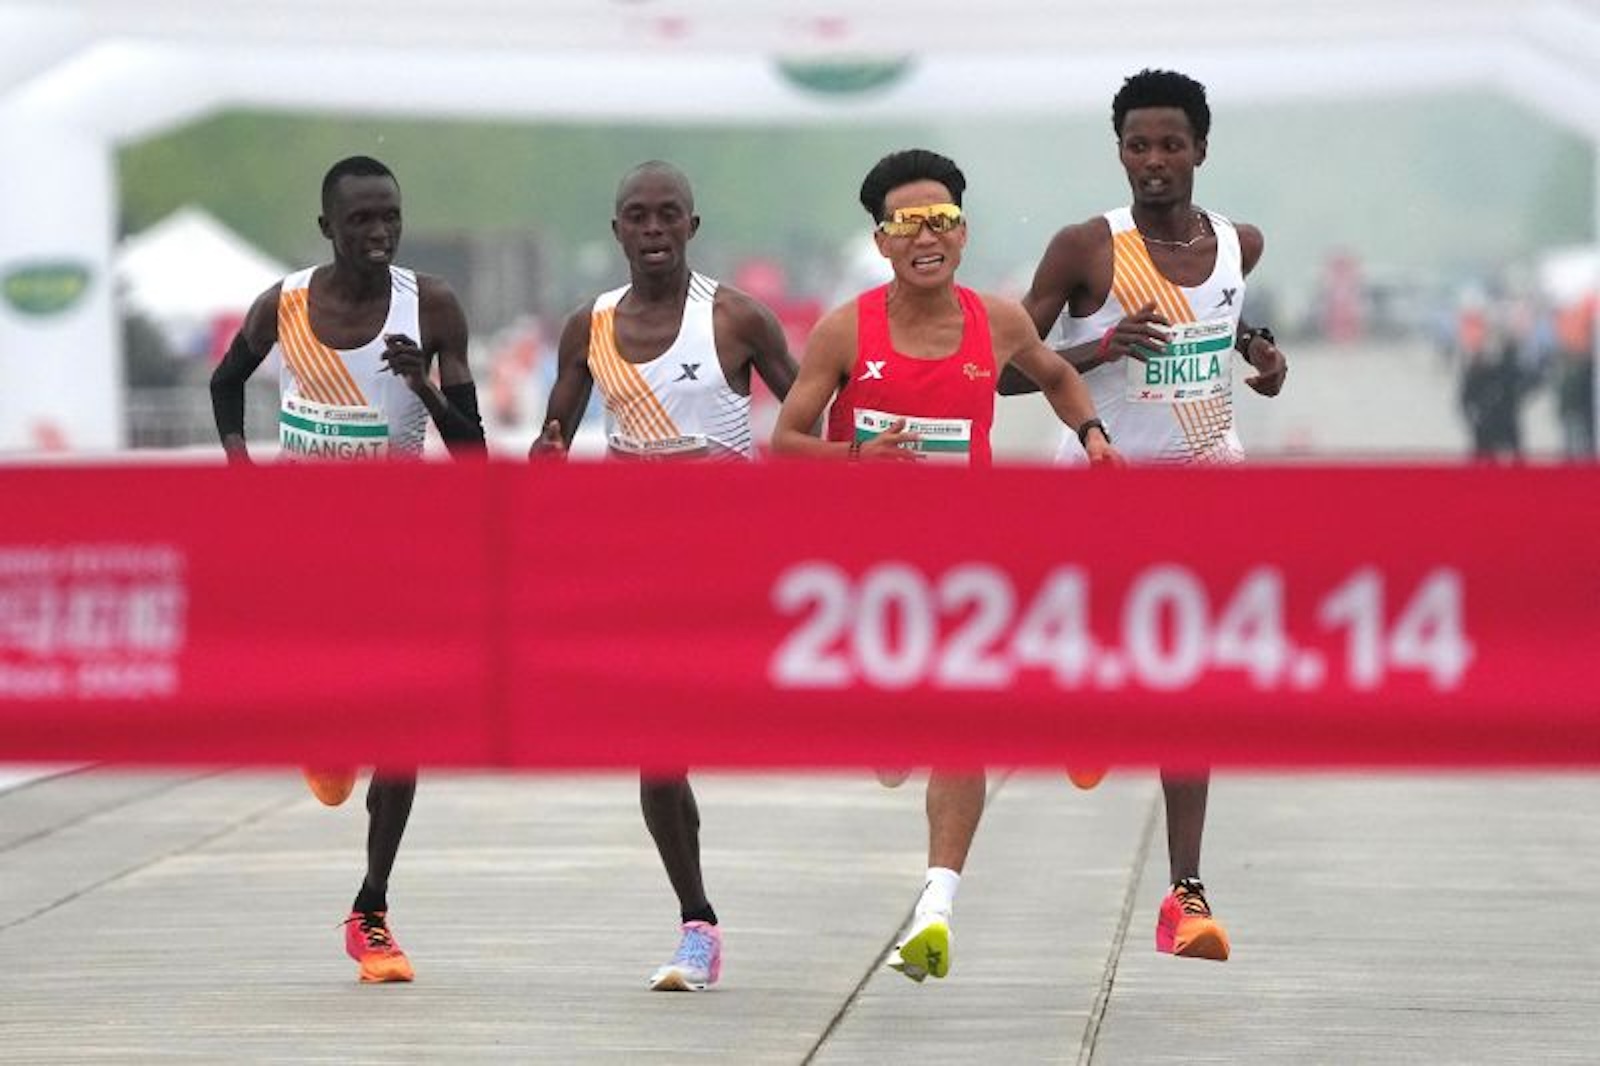 A Chinese runner's victory in the Beijing Half Marathon raises doubts about whether his rivals will let him win.